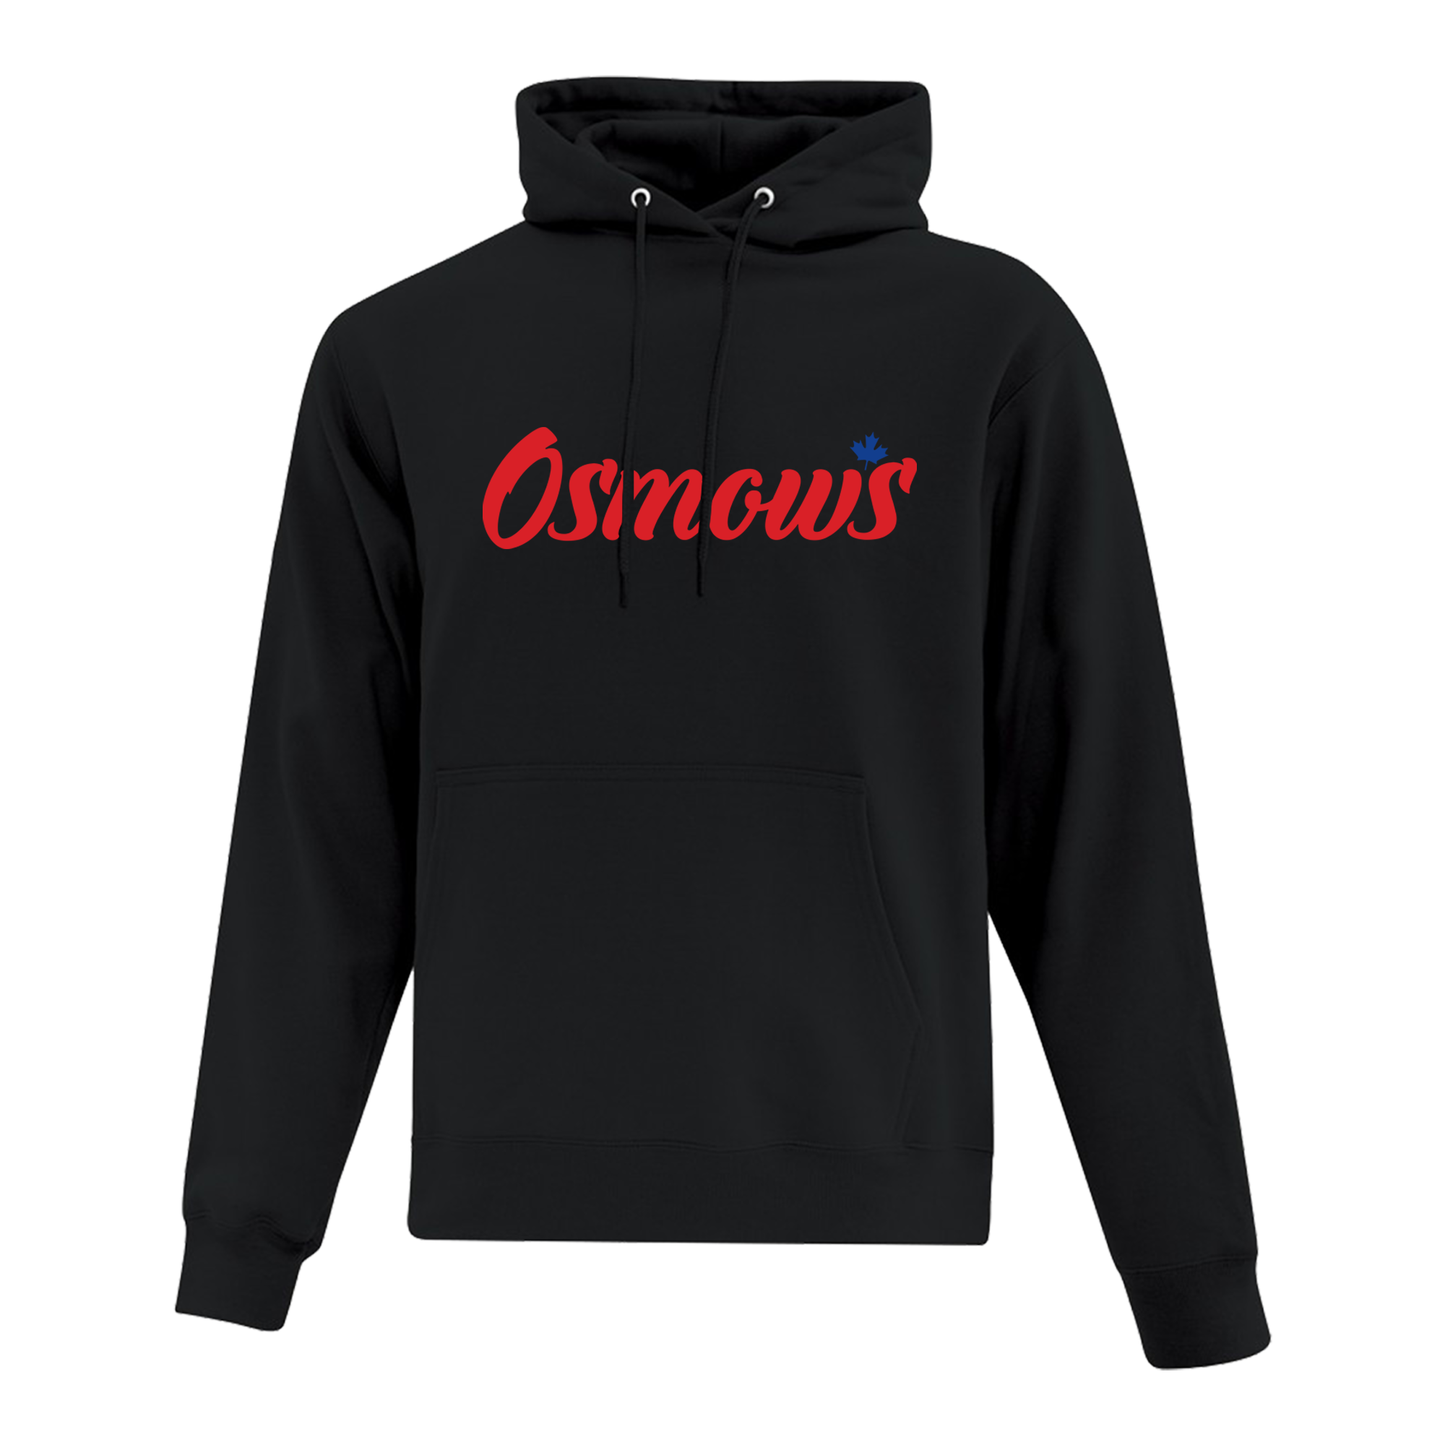 Osmow's Pullover Hoodie - Black